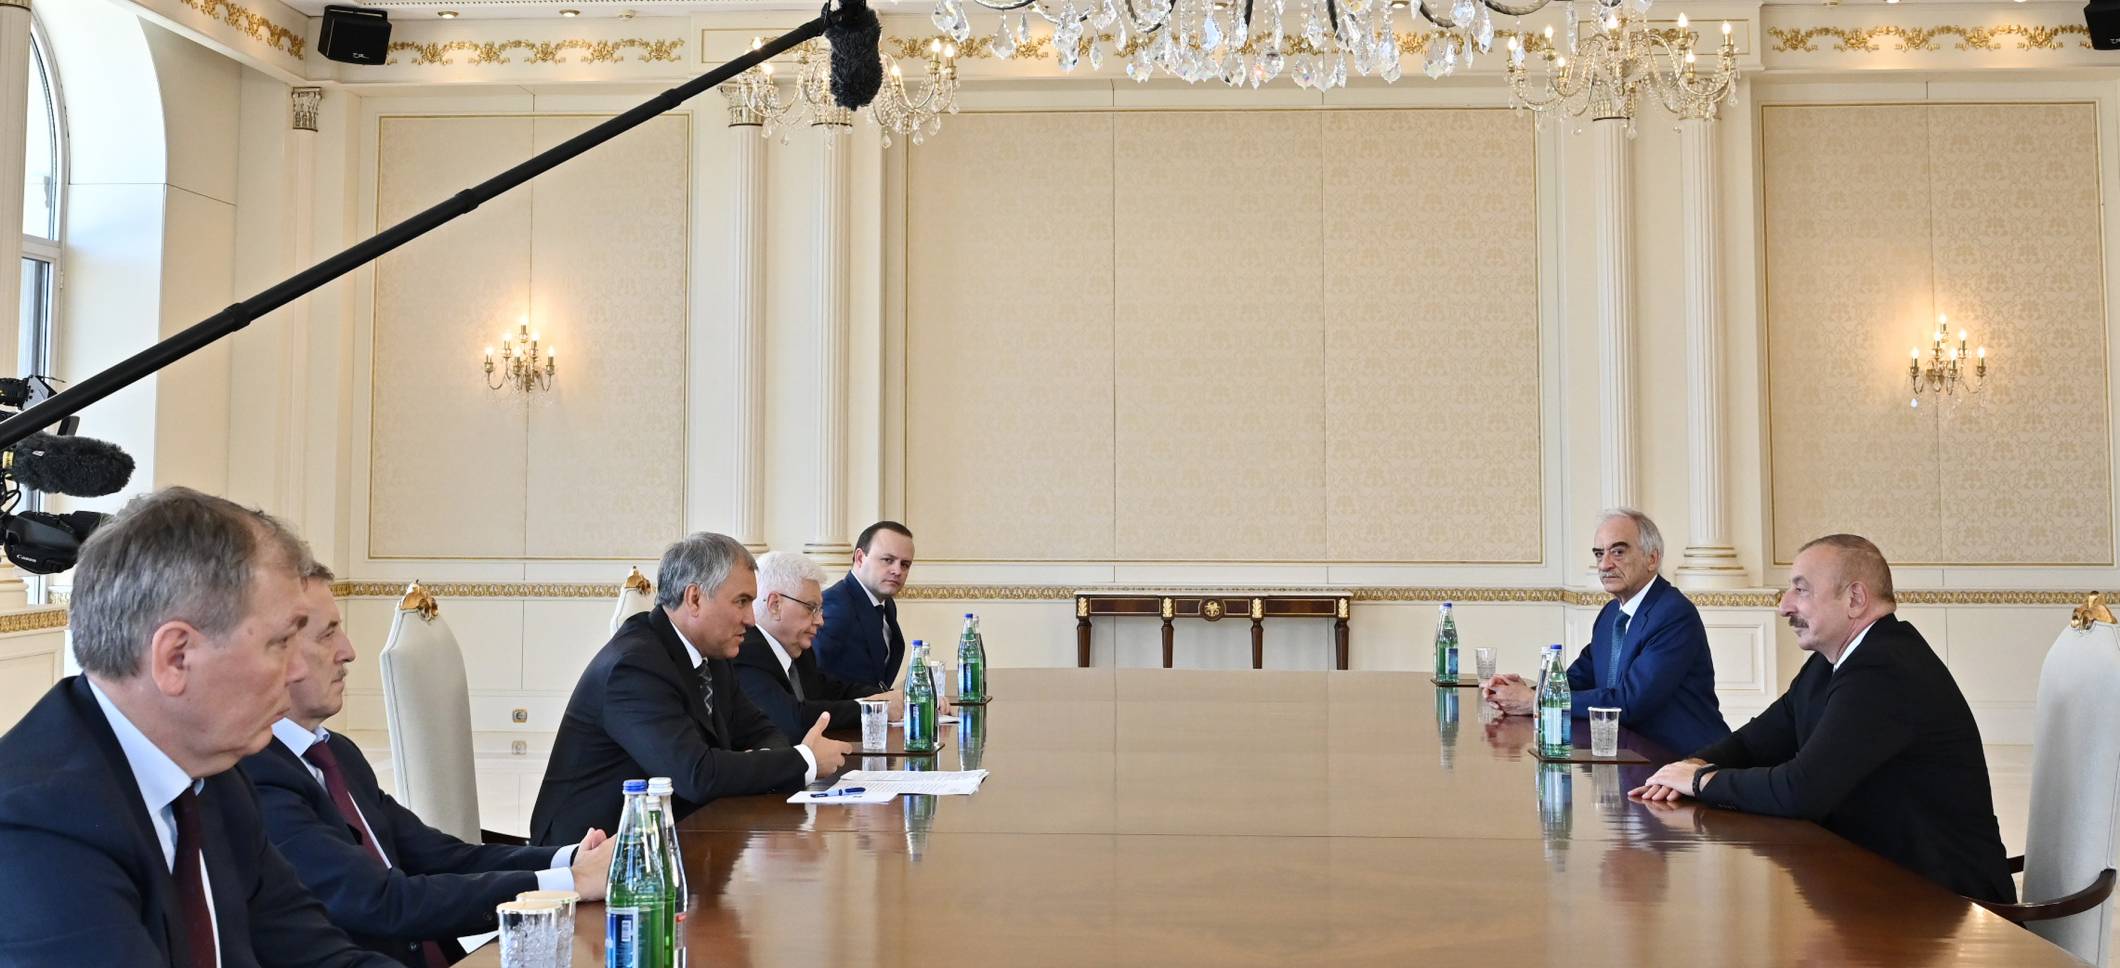 Ilham Aliyev received a delegation led by the Chairman of the State Duma of Russia